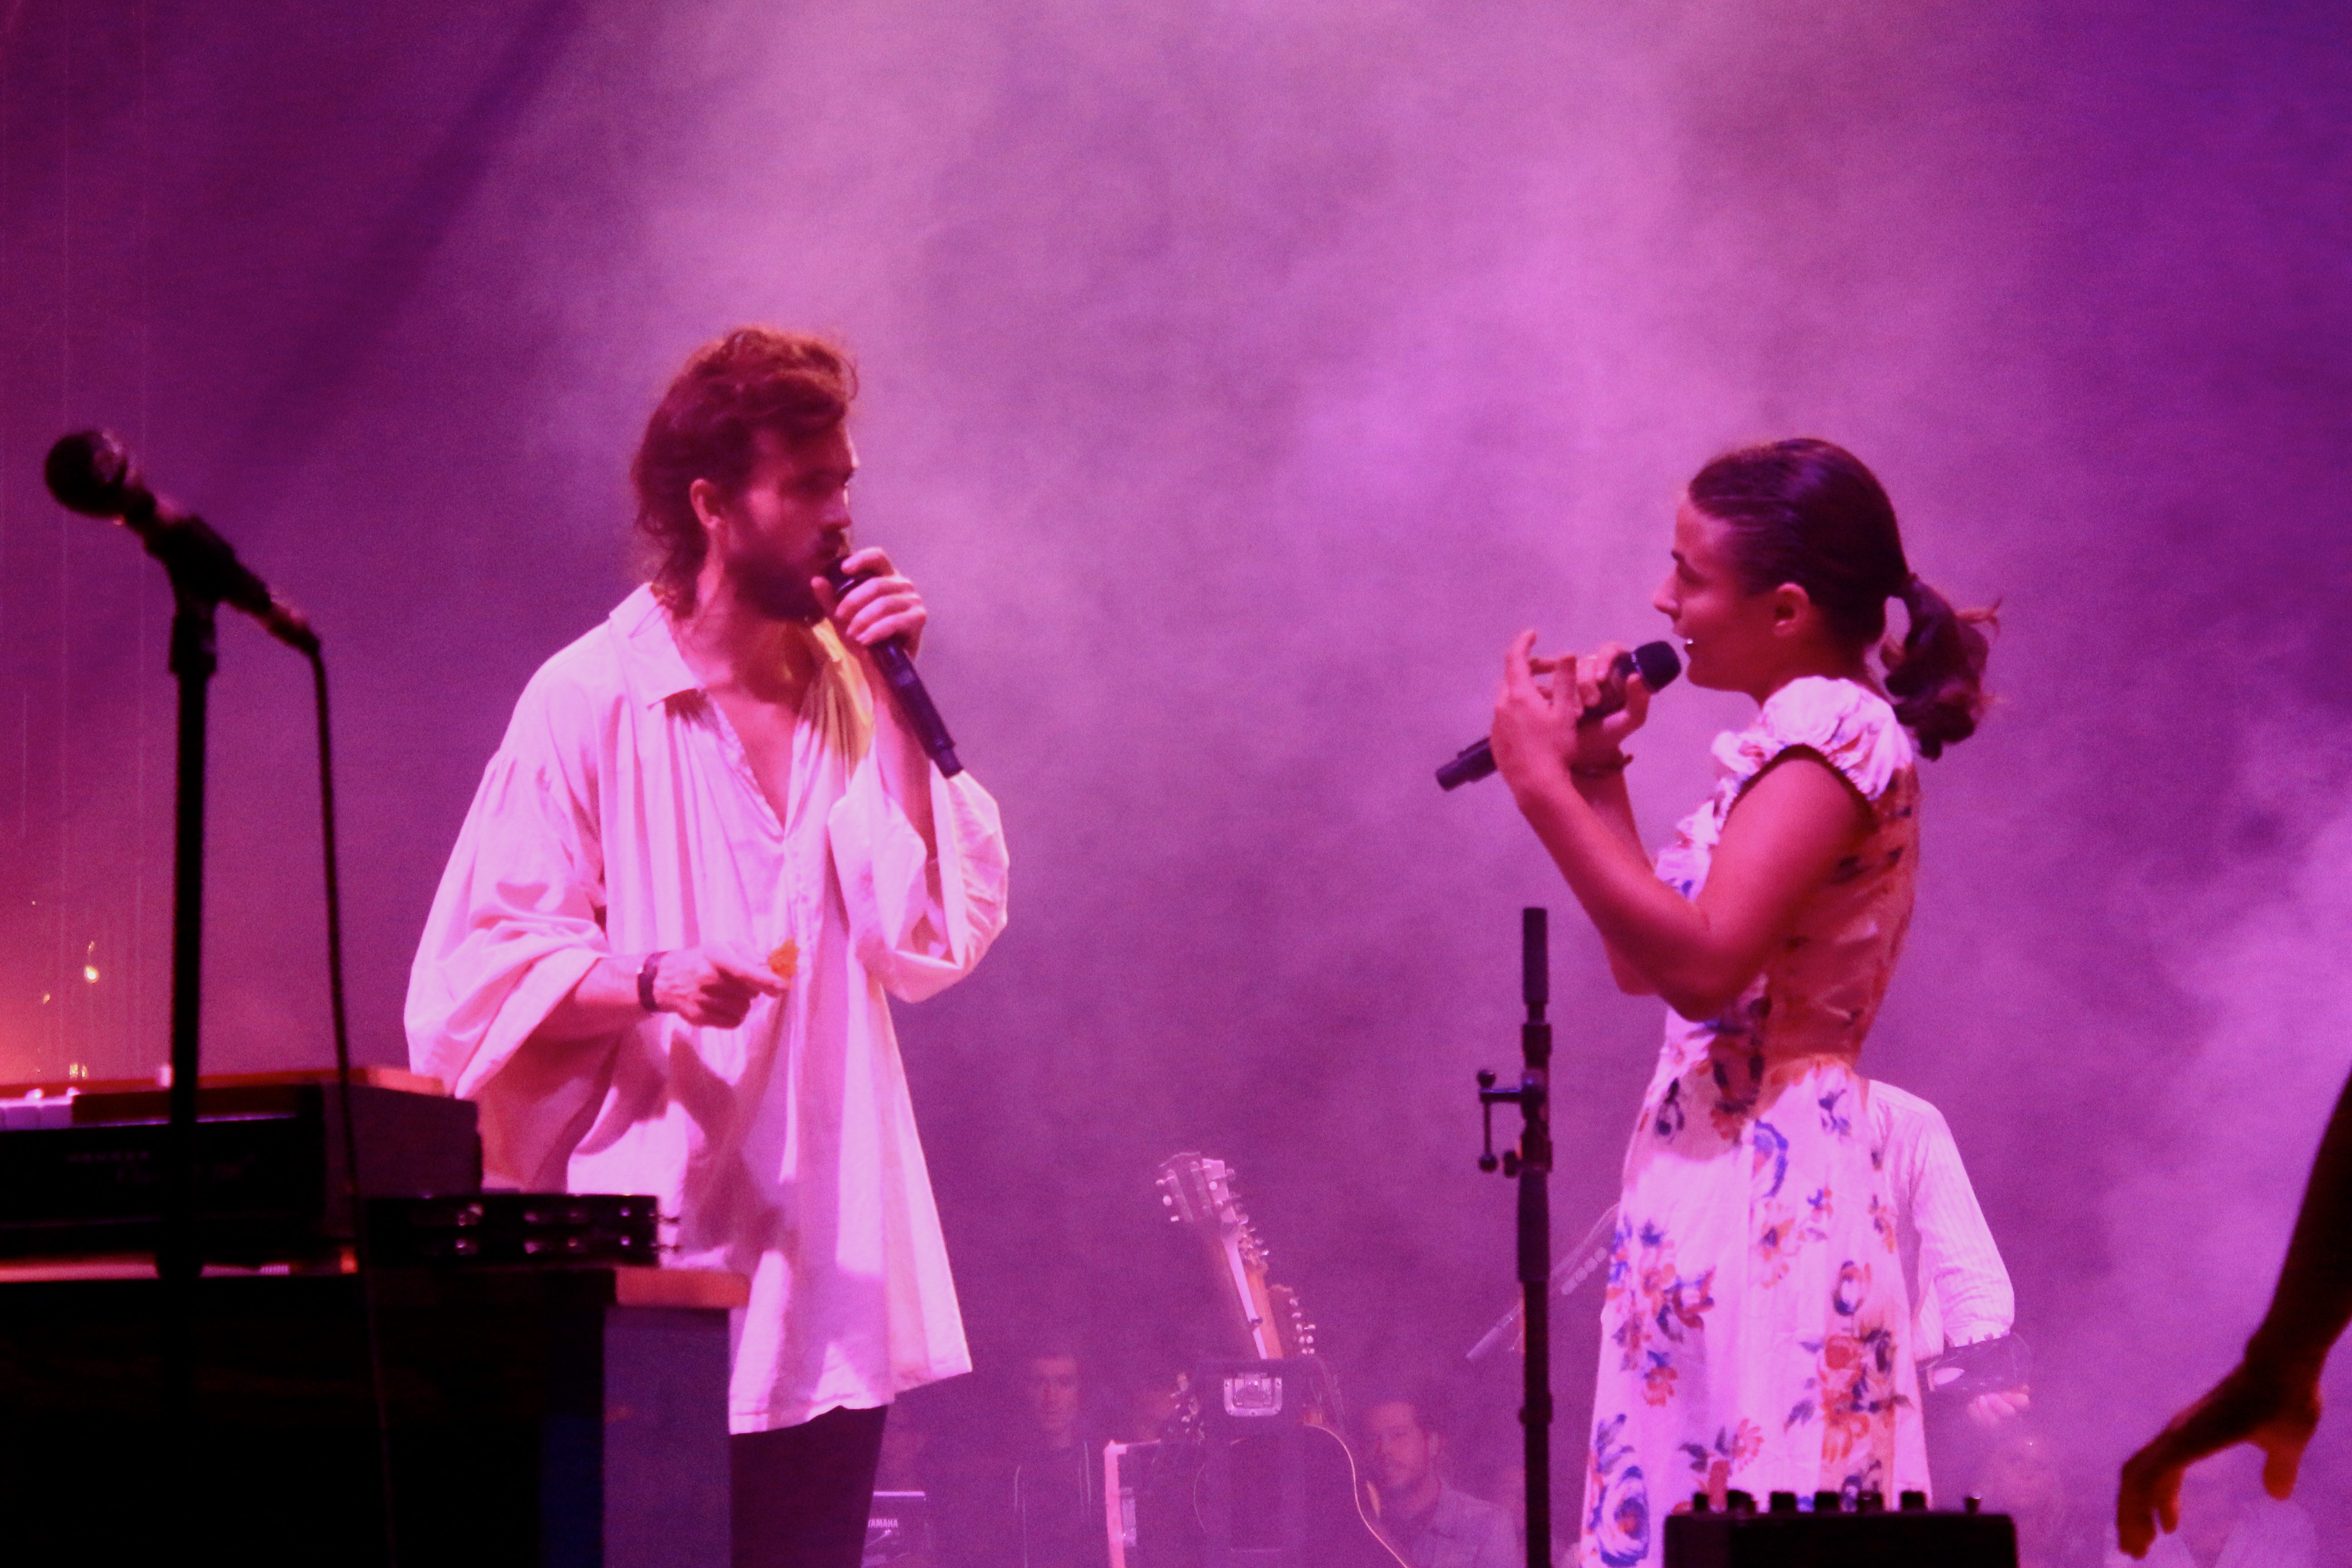 Alex Ebert Working on Solo Music, Confirms Edward Sharpe and the Magnetic Zeros Are On Hiatus